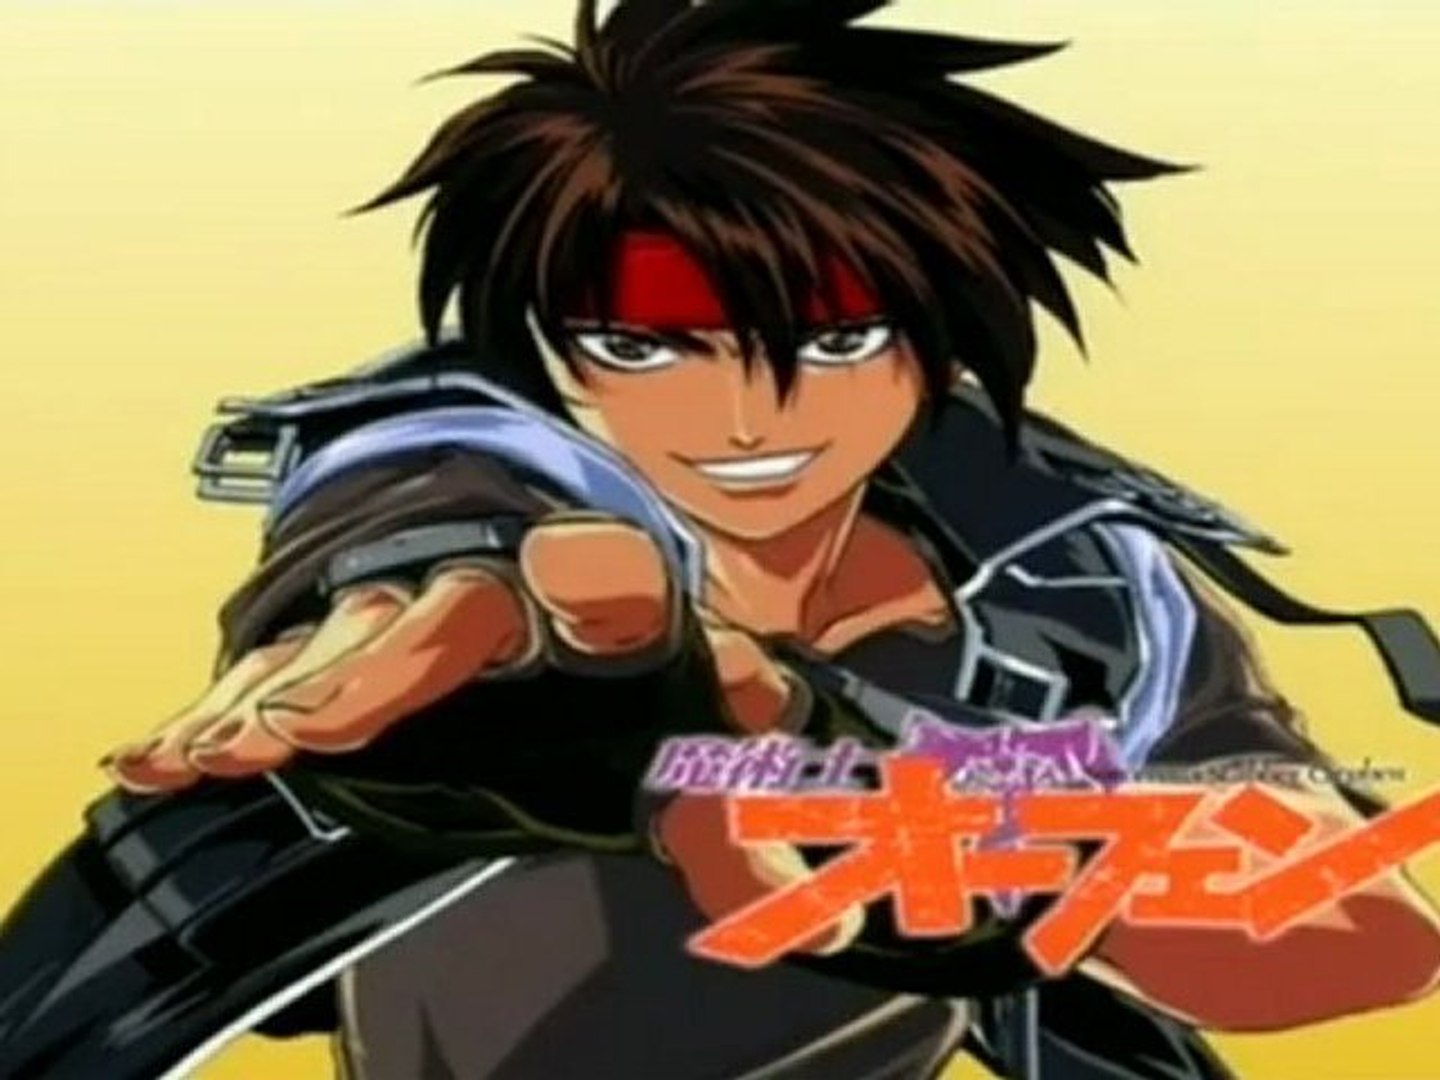 Sorcerous Stabber Orphen: Chaos in Urbanrama - EP 1 English Subbed - video  Dailymotion